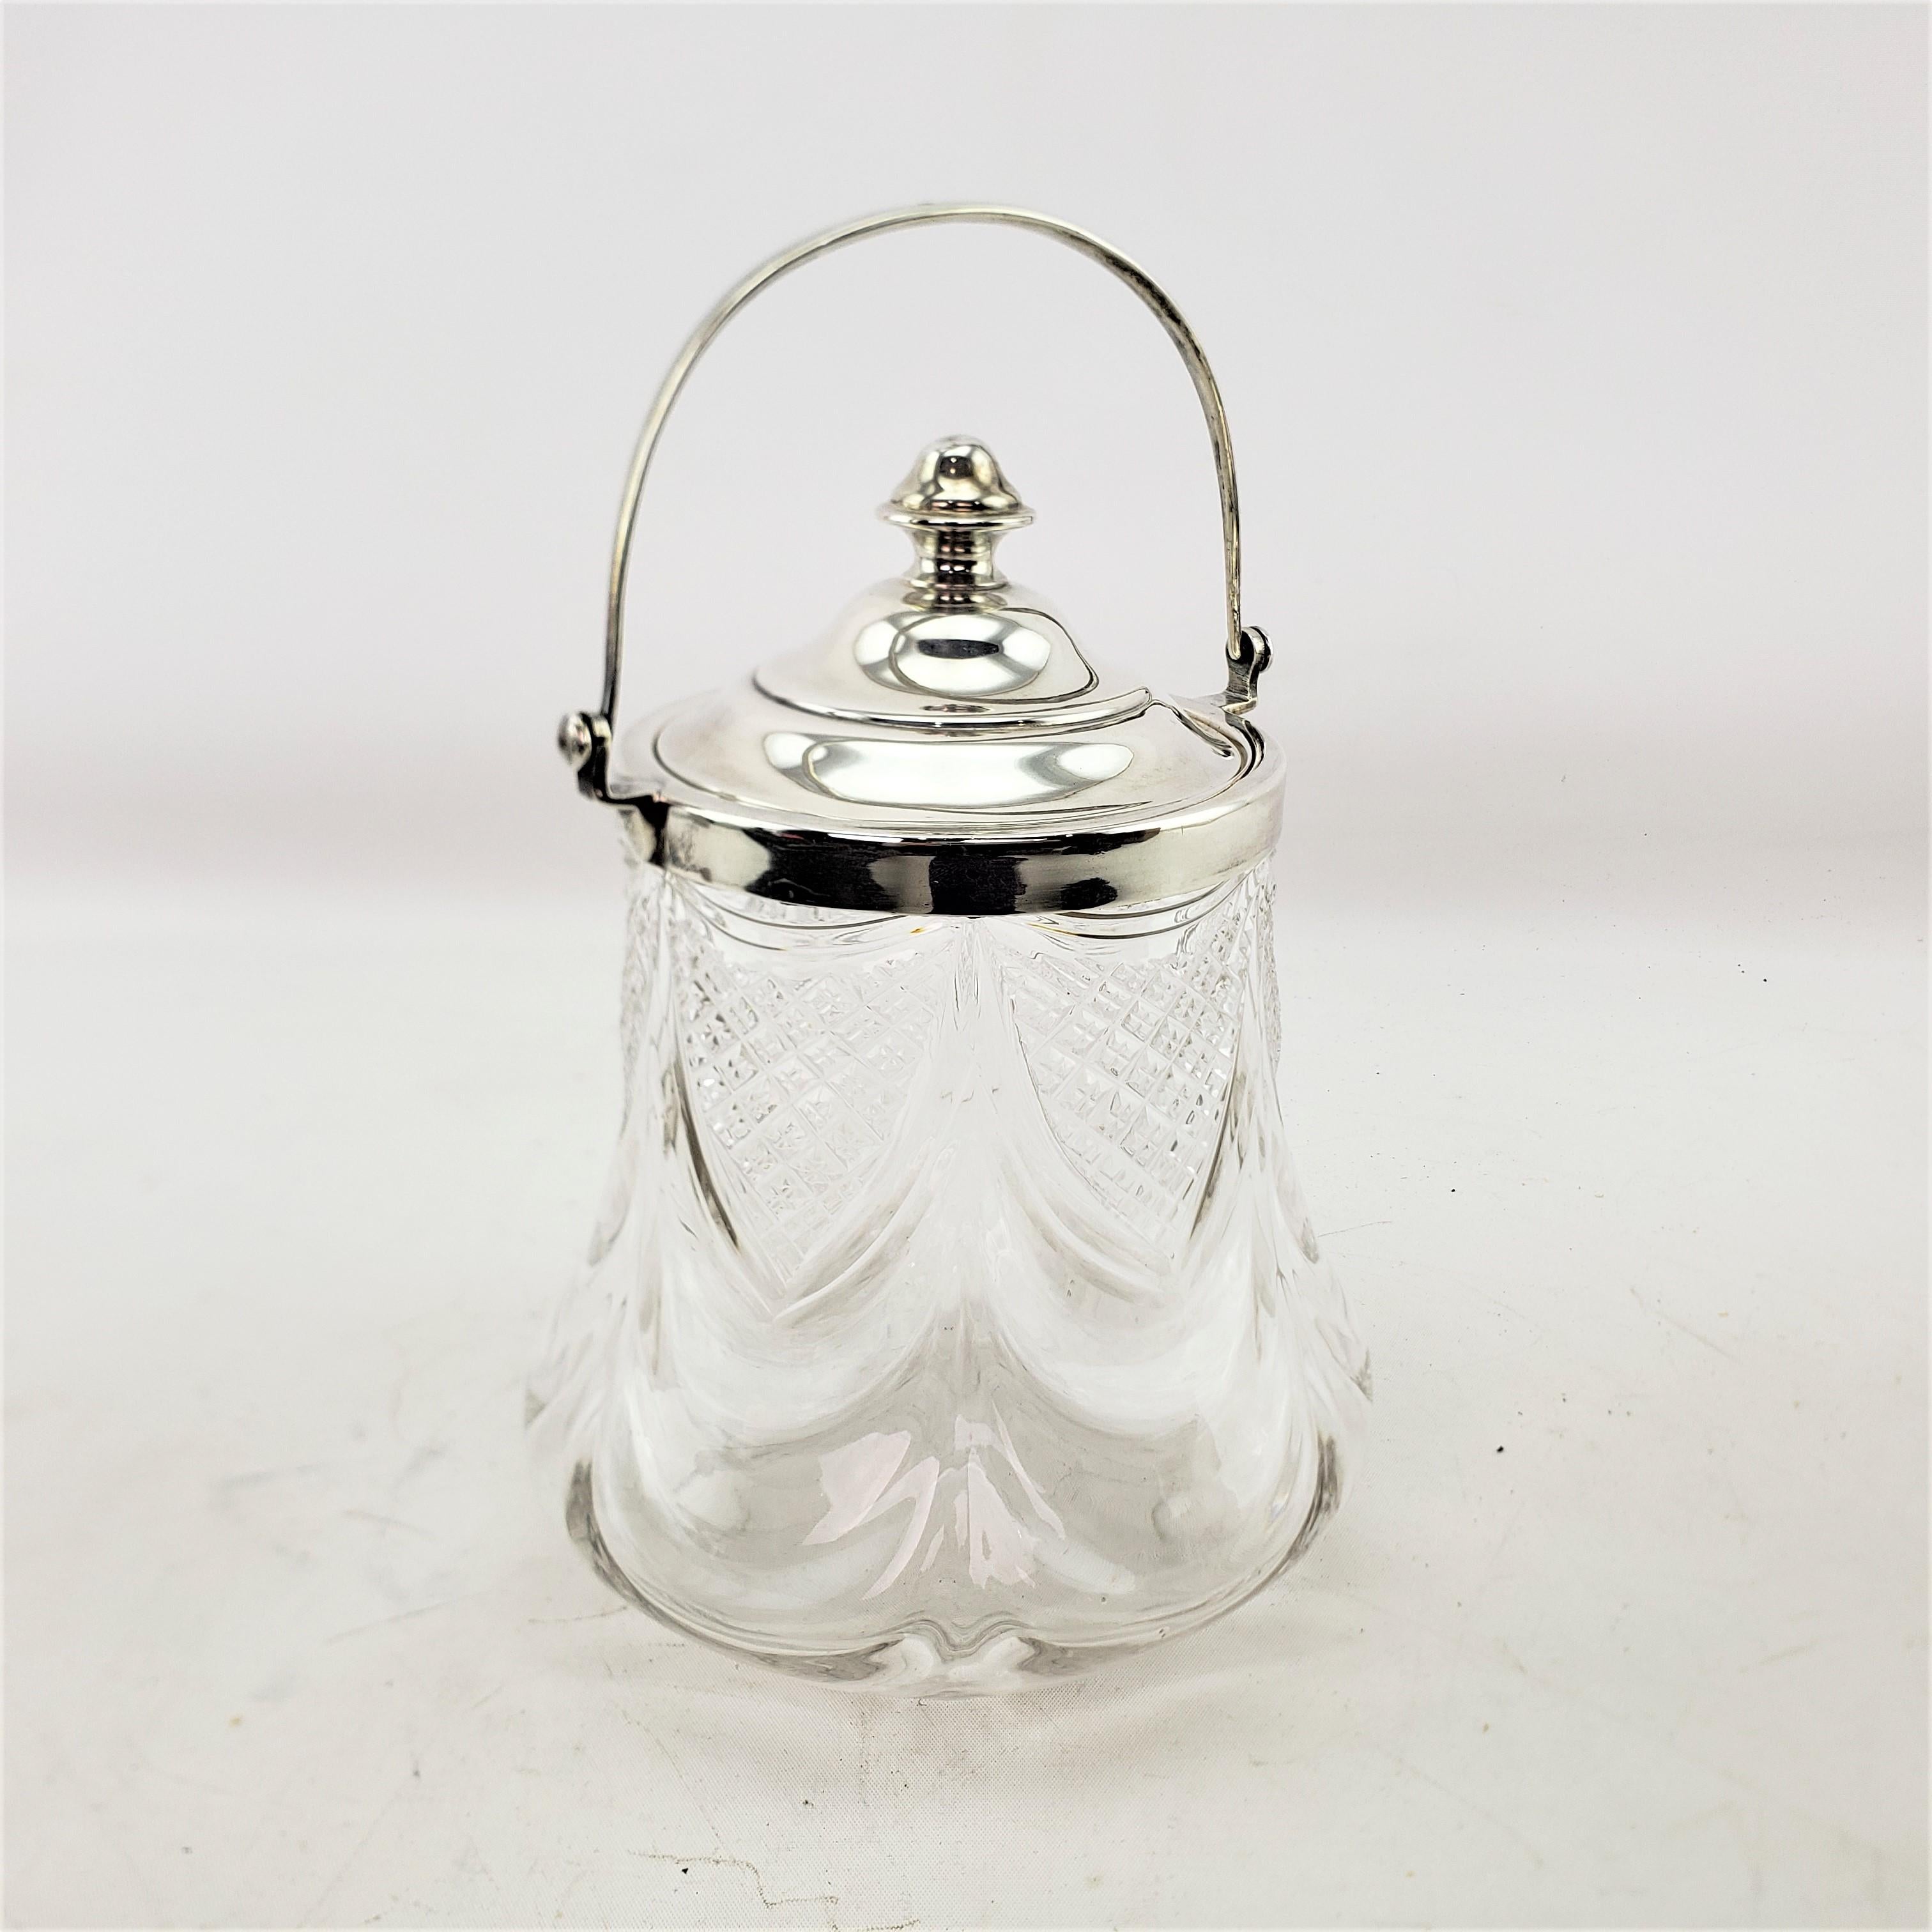 20th Century Antique English Crystal & Sterling Silver Biscuit Barrel or Covered Jar For Sale